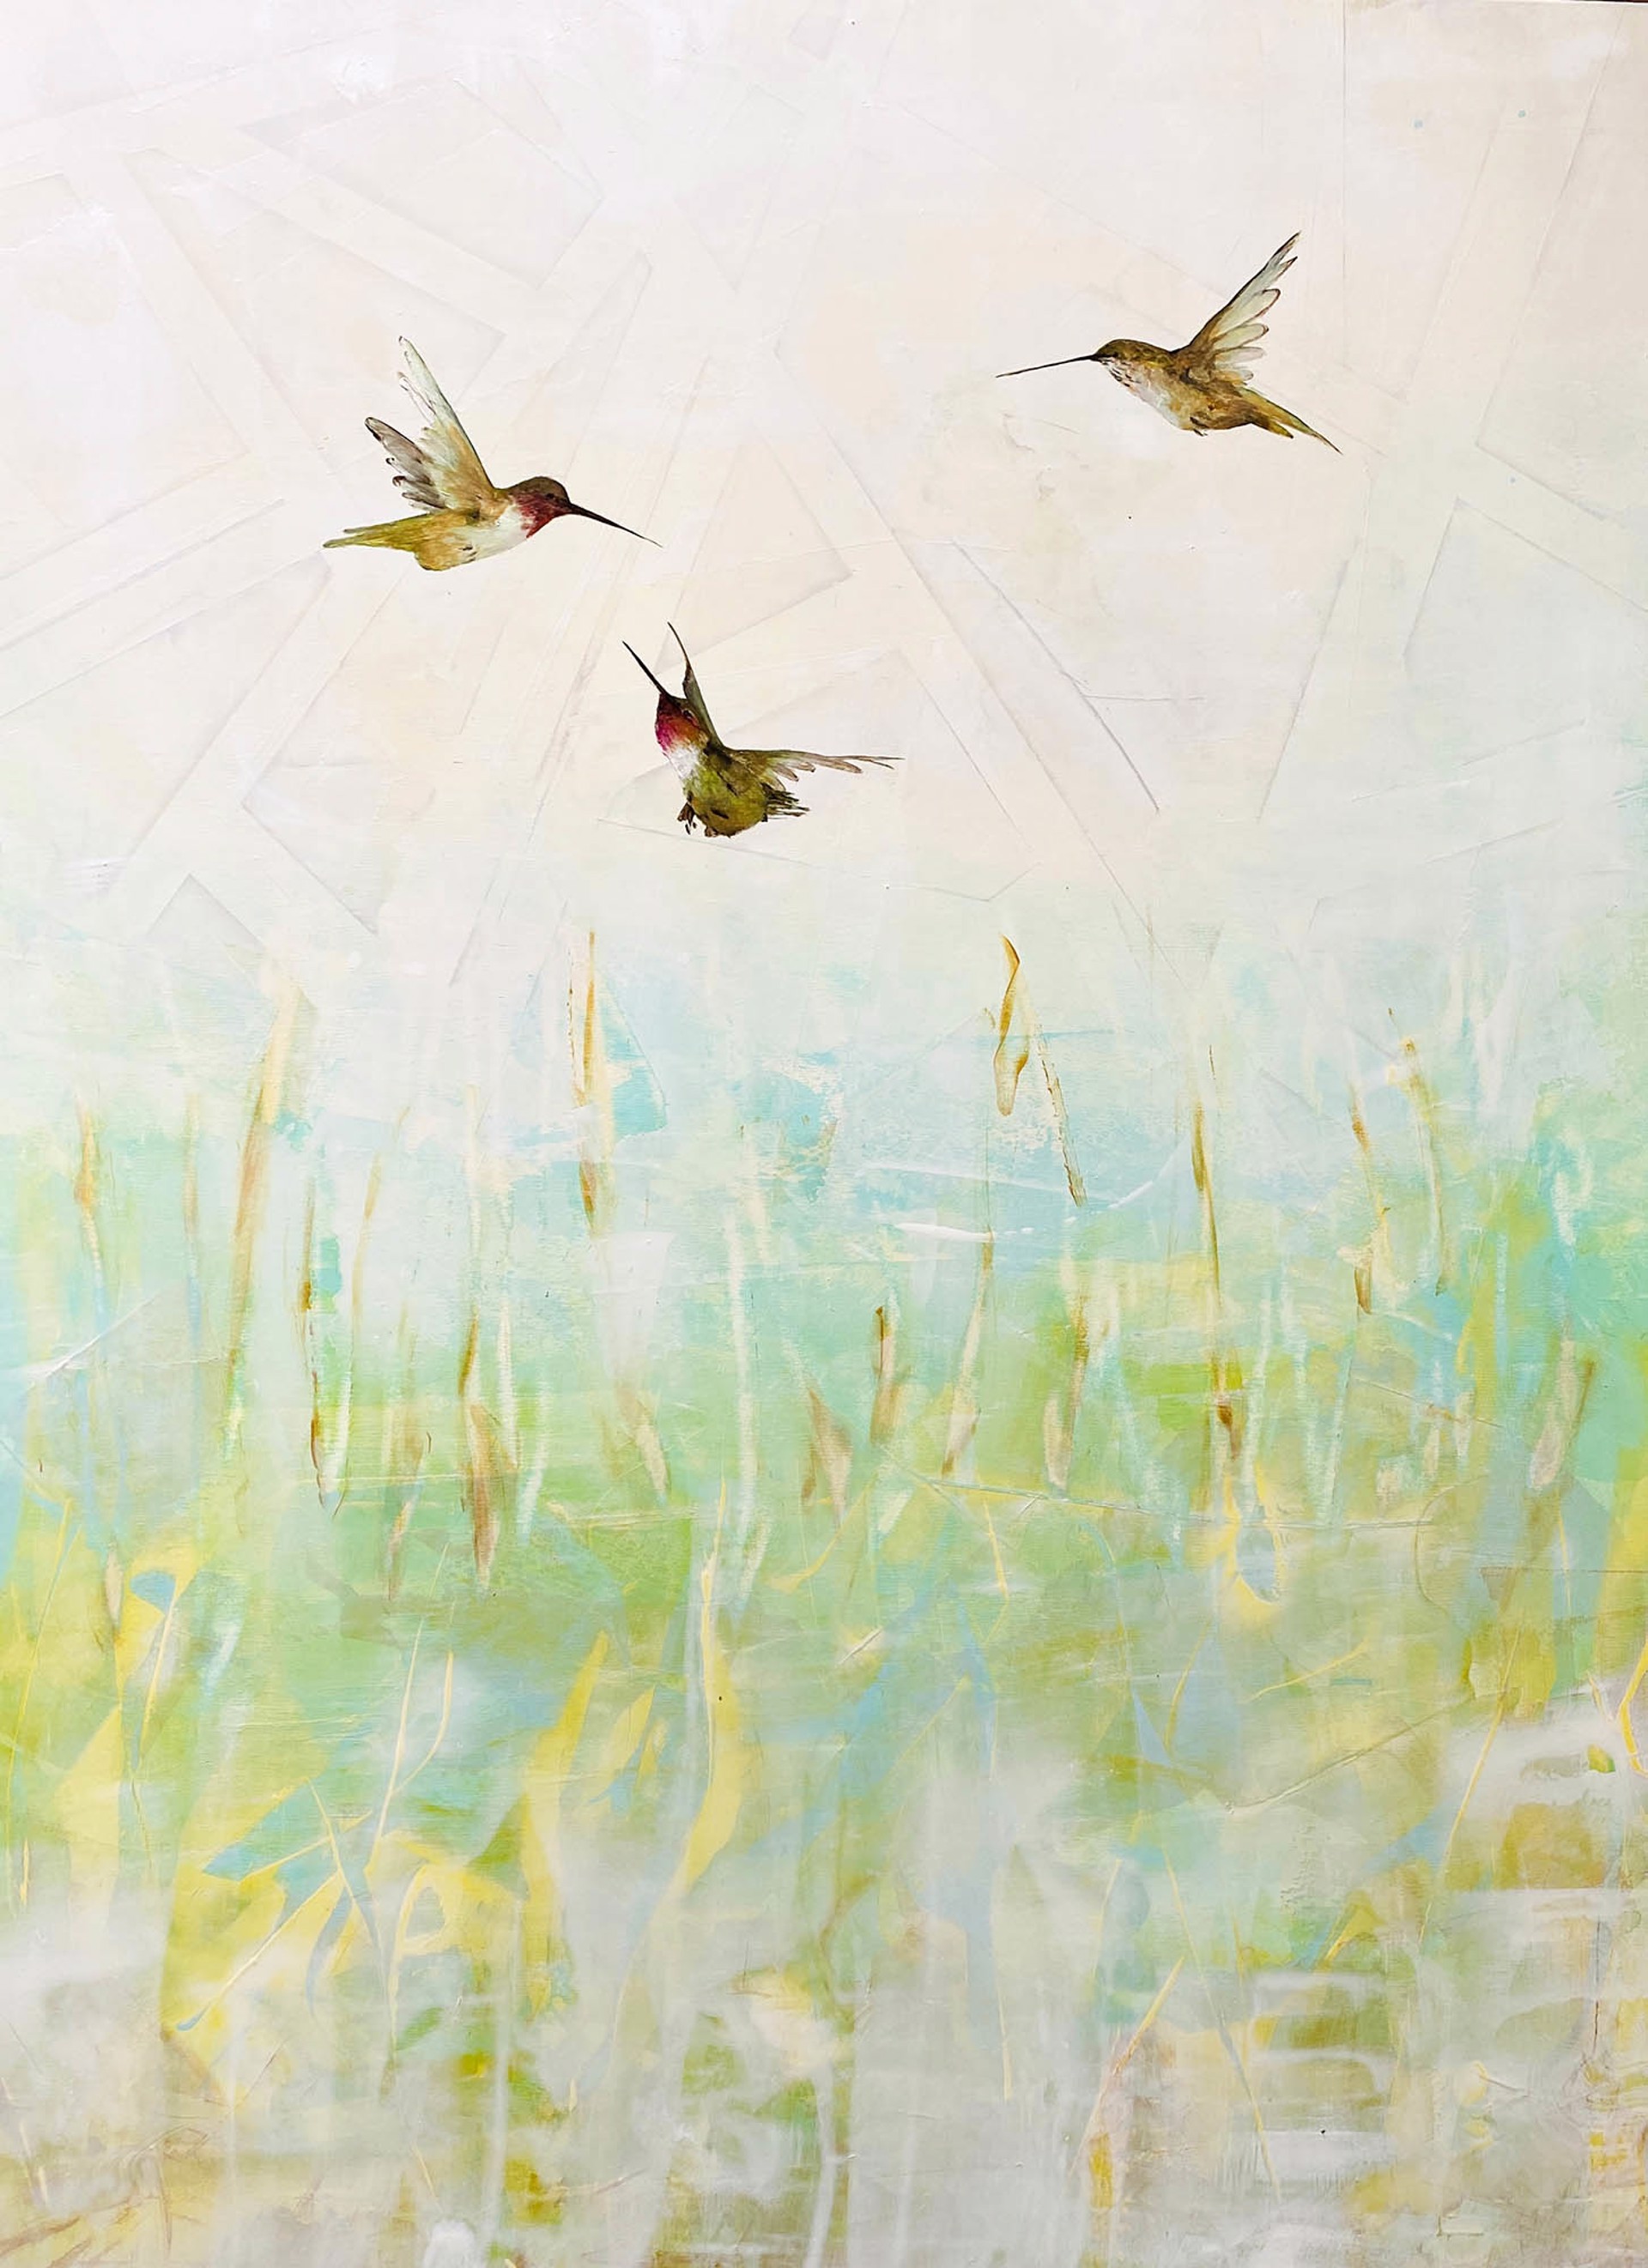 Original Oil Painting Featuring Three Hummingbirds In Flight Over Abstract Green Background